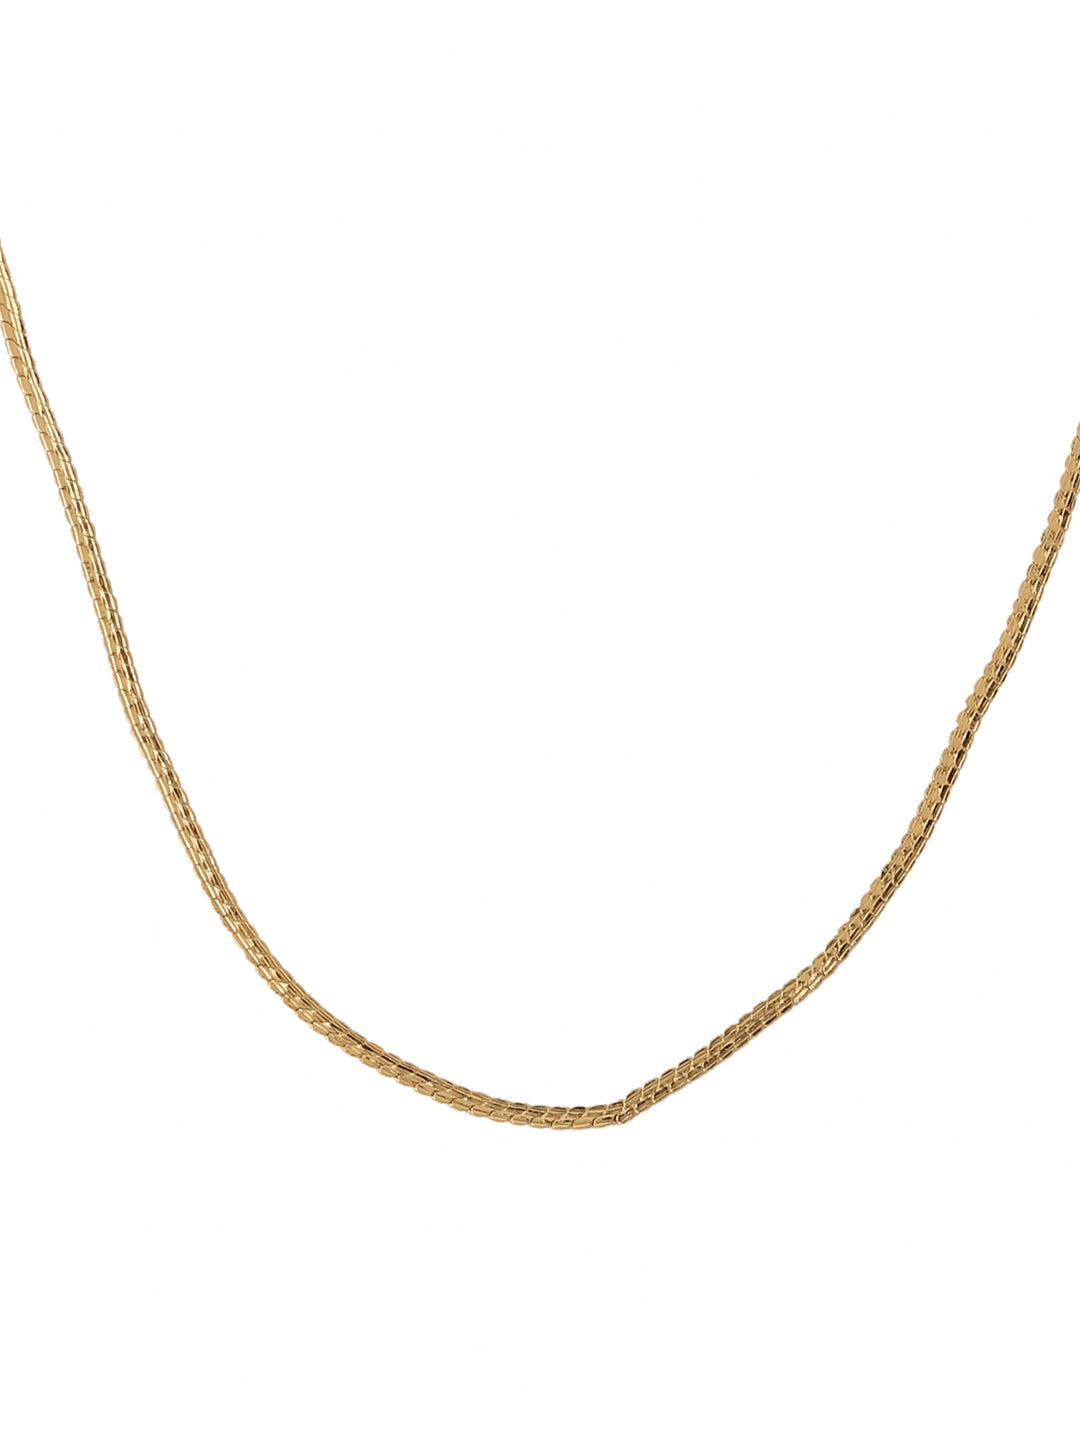 Royal Links Gold Plated Chain For Men-Viraasi